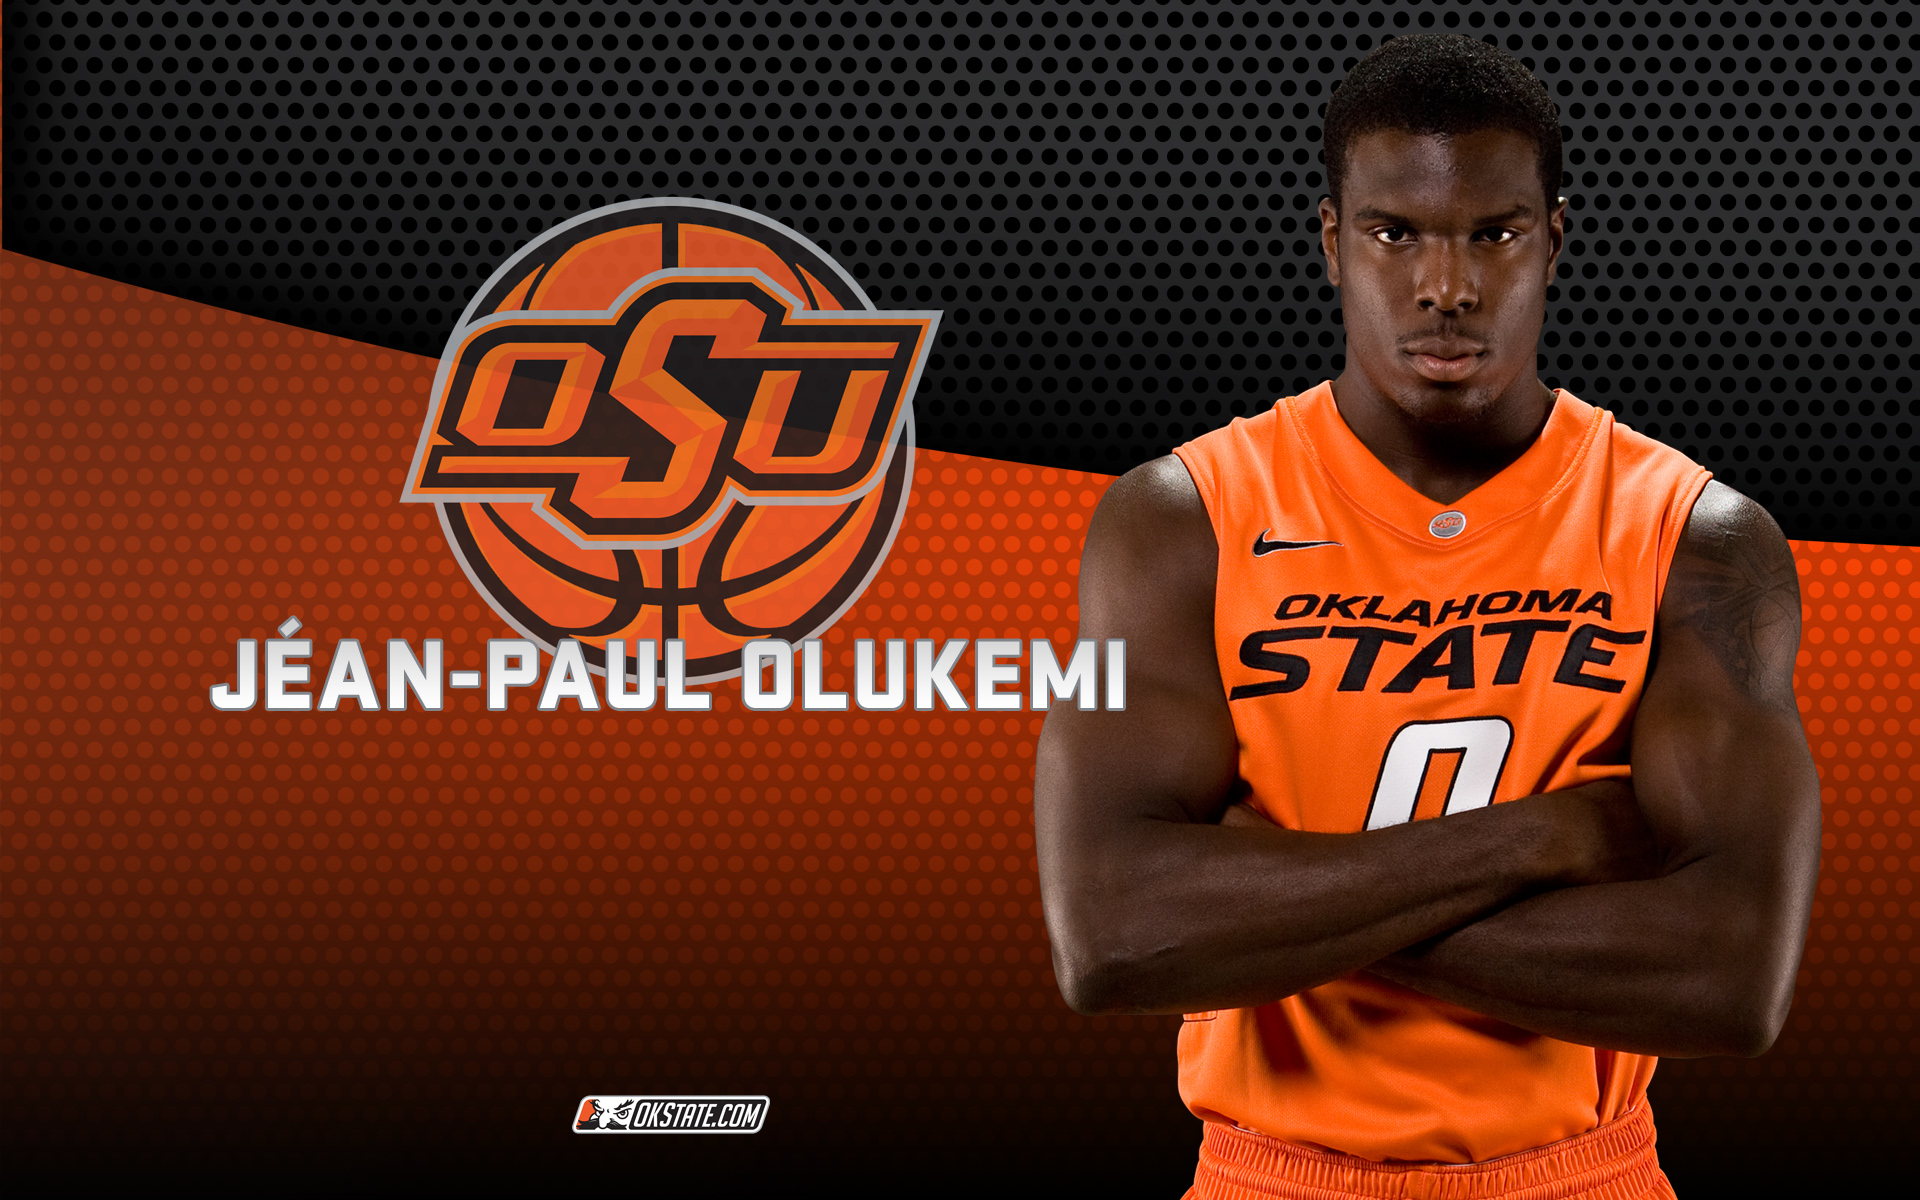 Cowboy Basketball Wallpaper Oklahoma State Official Athletic Site